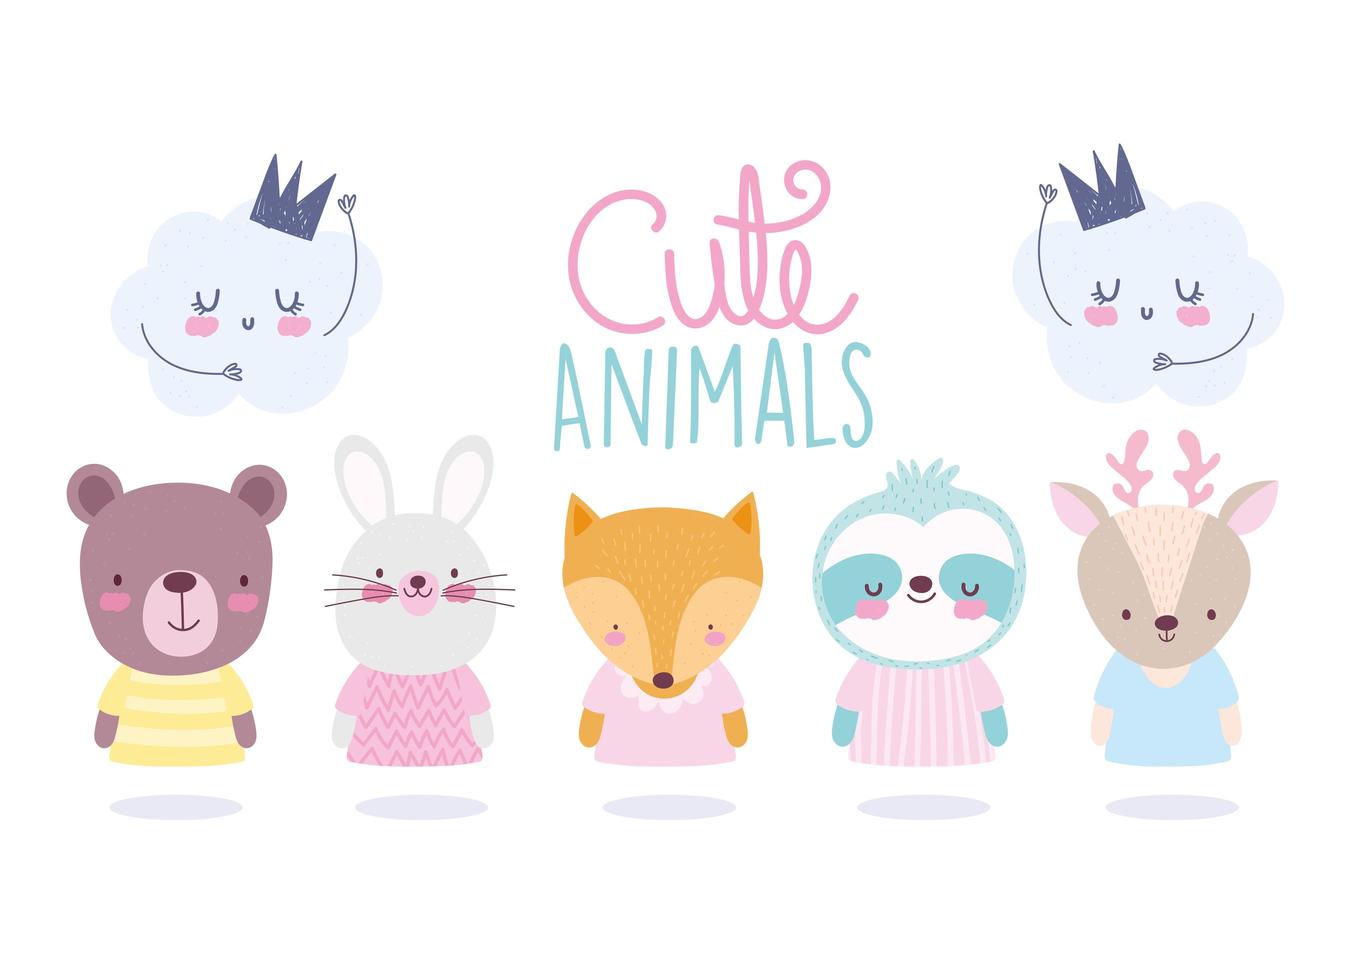 Set of cute animals characters with cloud icons vector